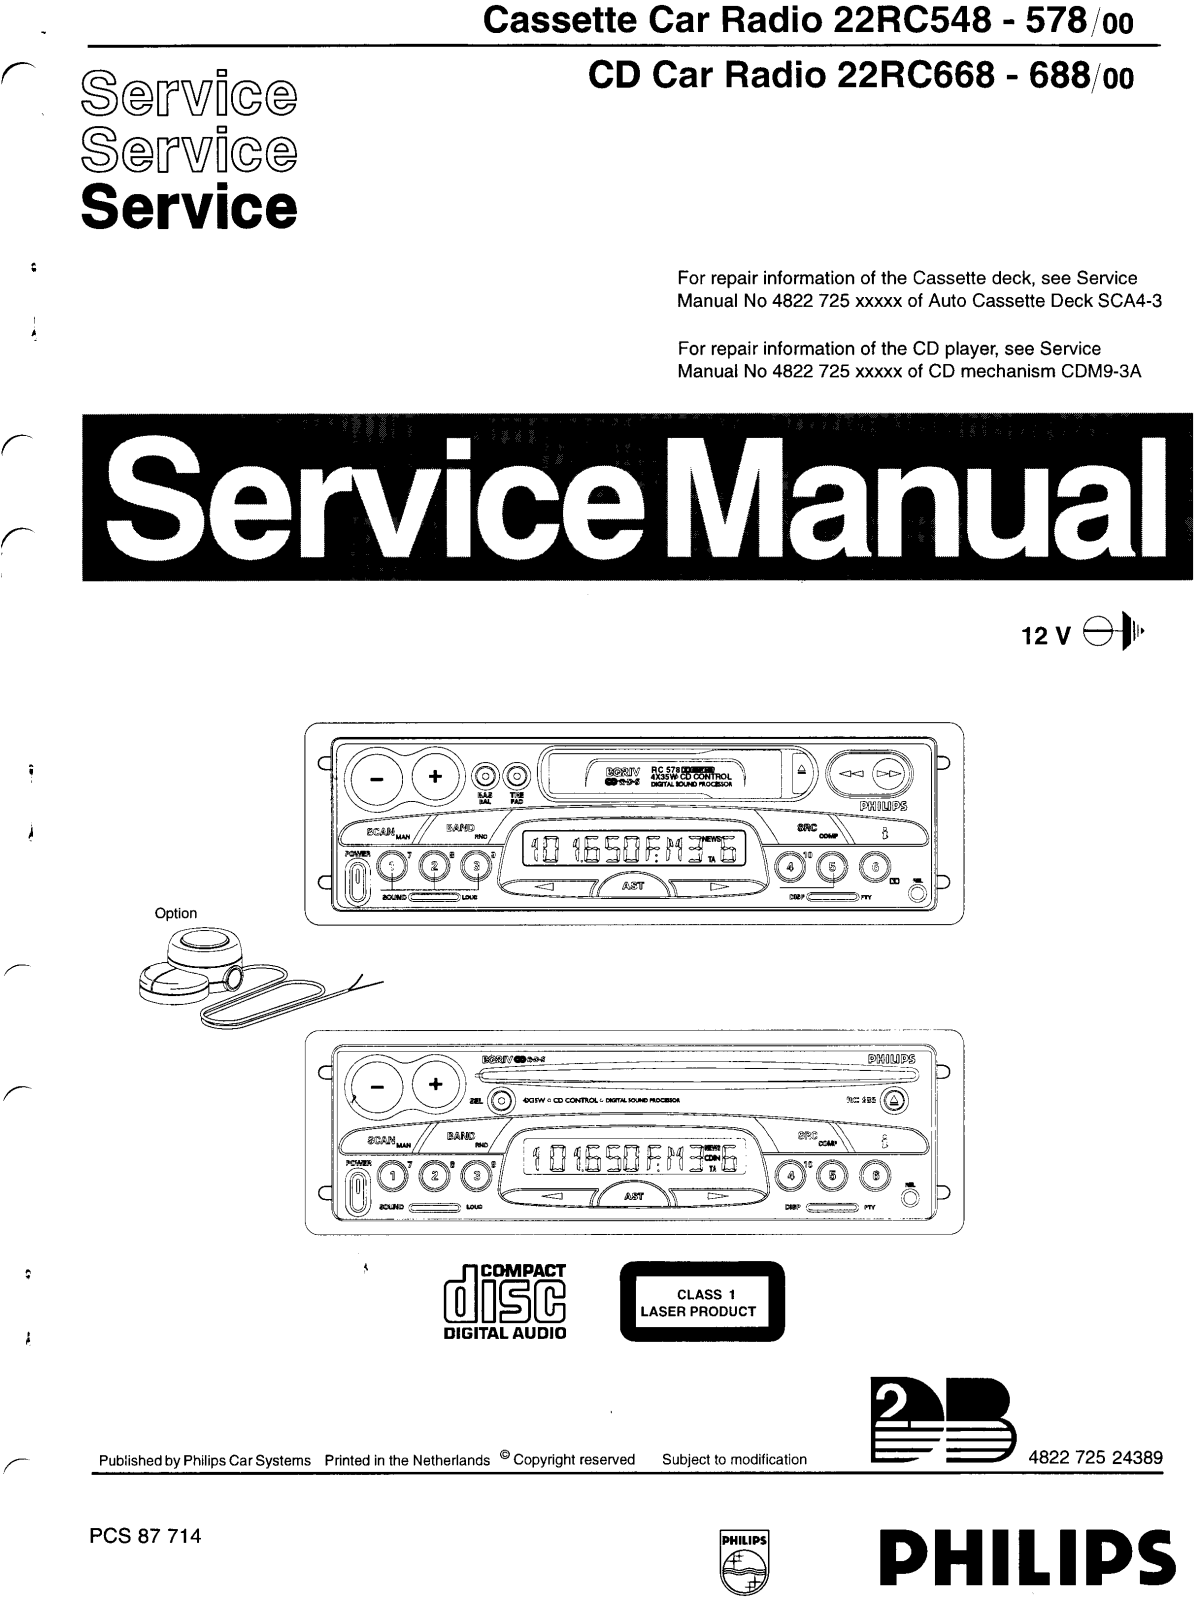 Philips RC-548, RC-578, RC-668, RC-688 Service manual